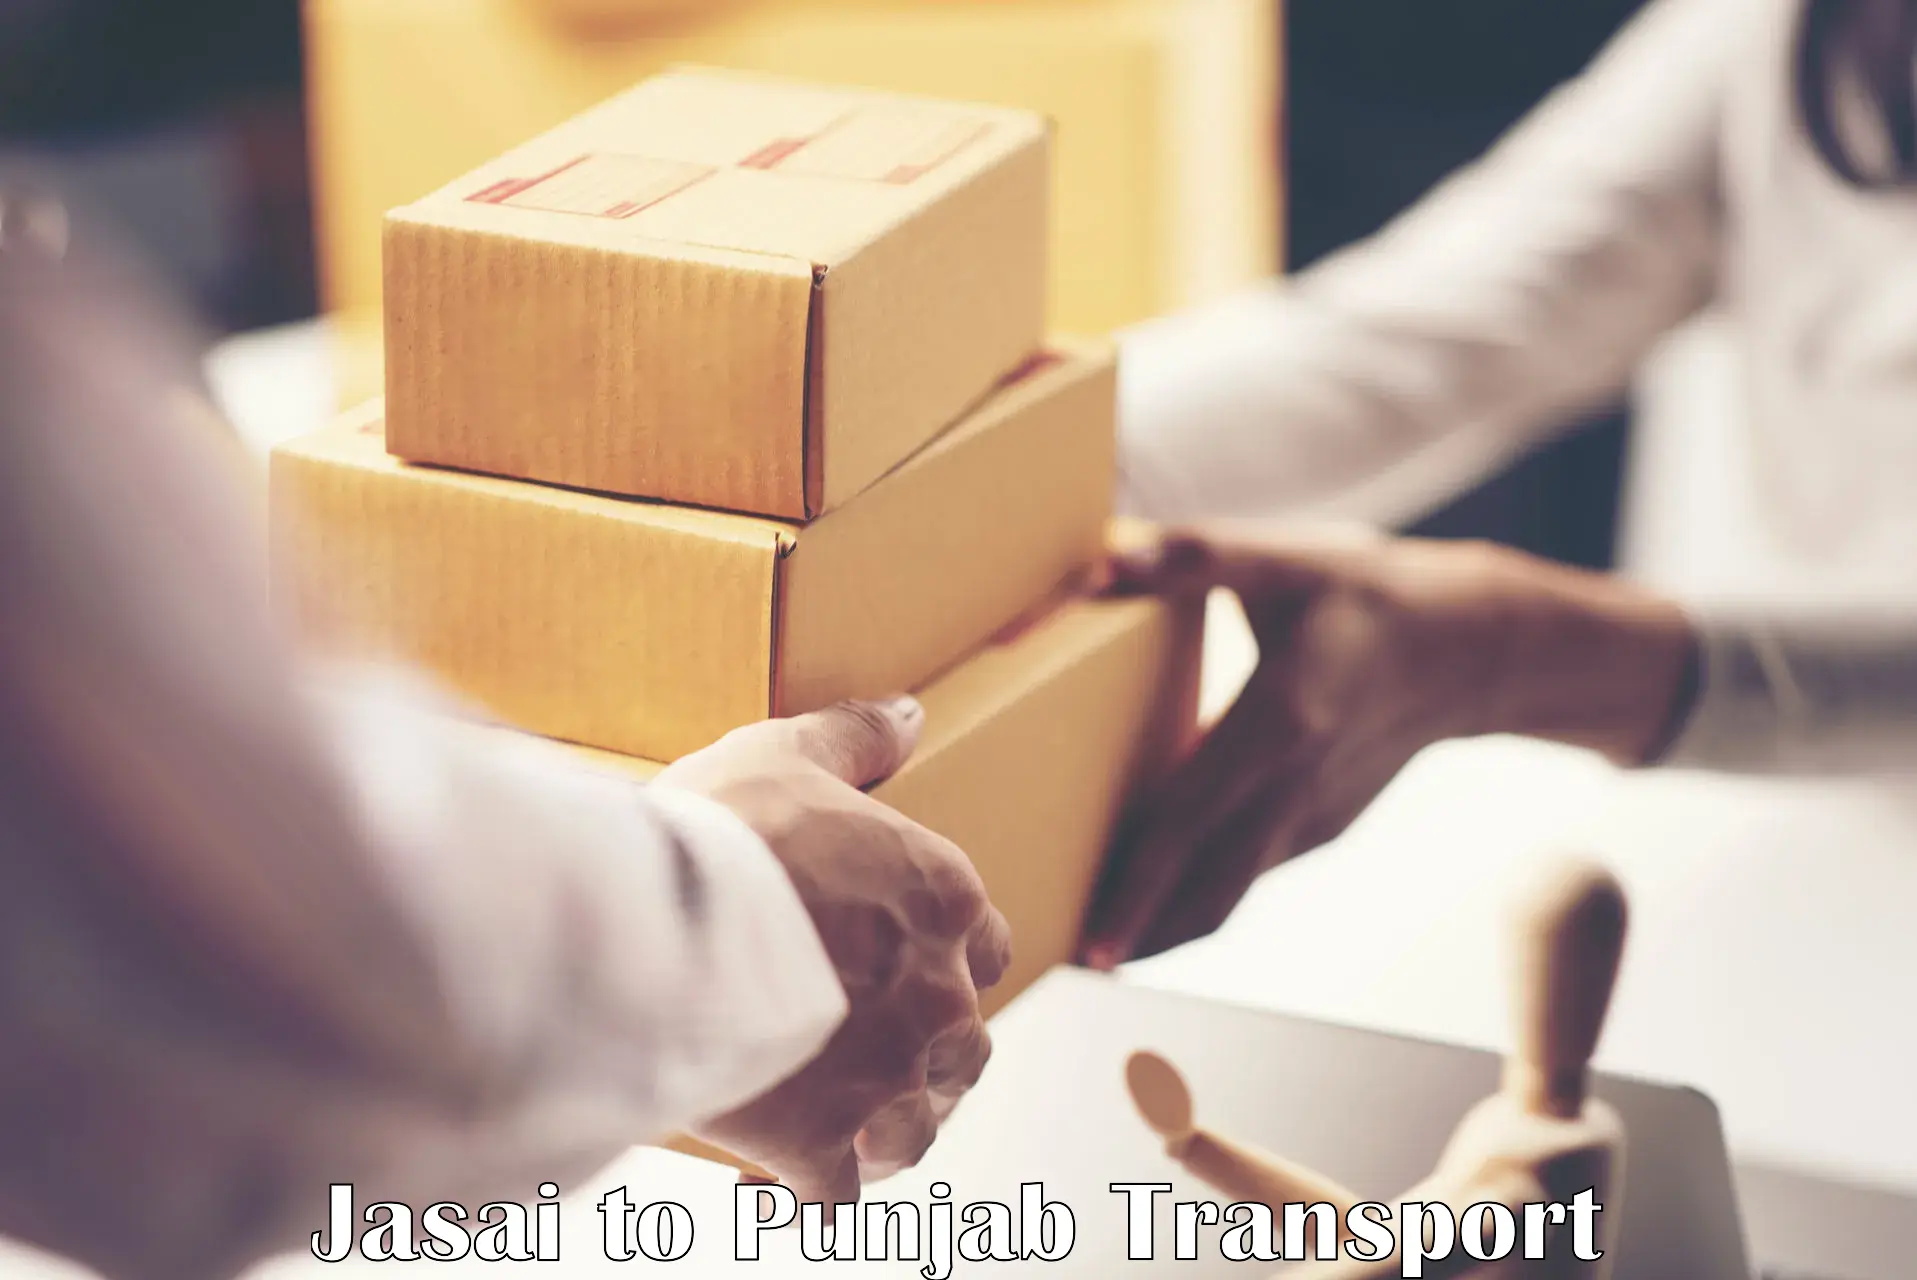 Air freight transport services Jasai to Pathankot